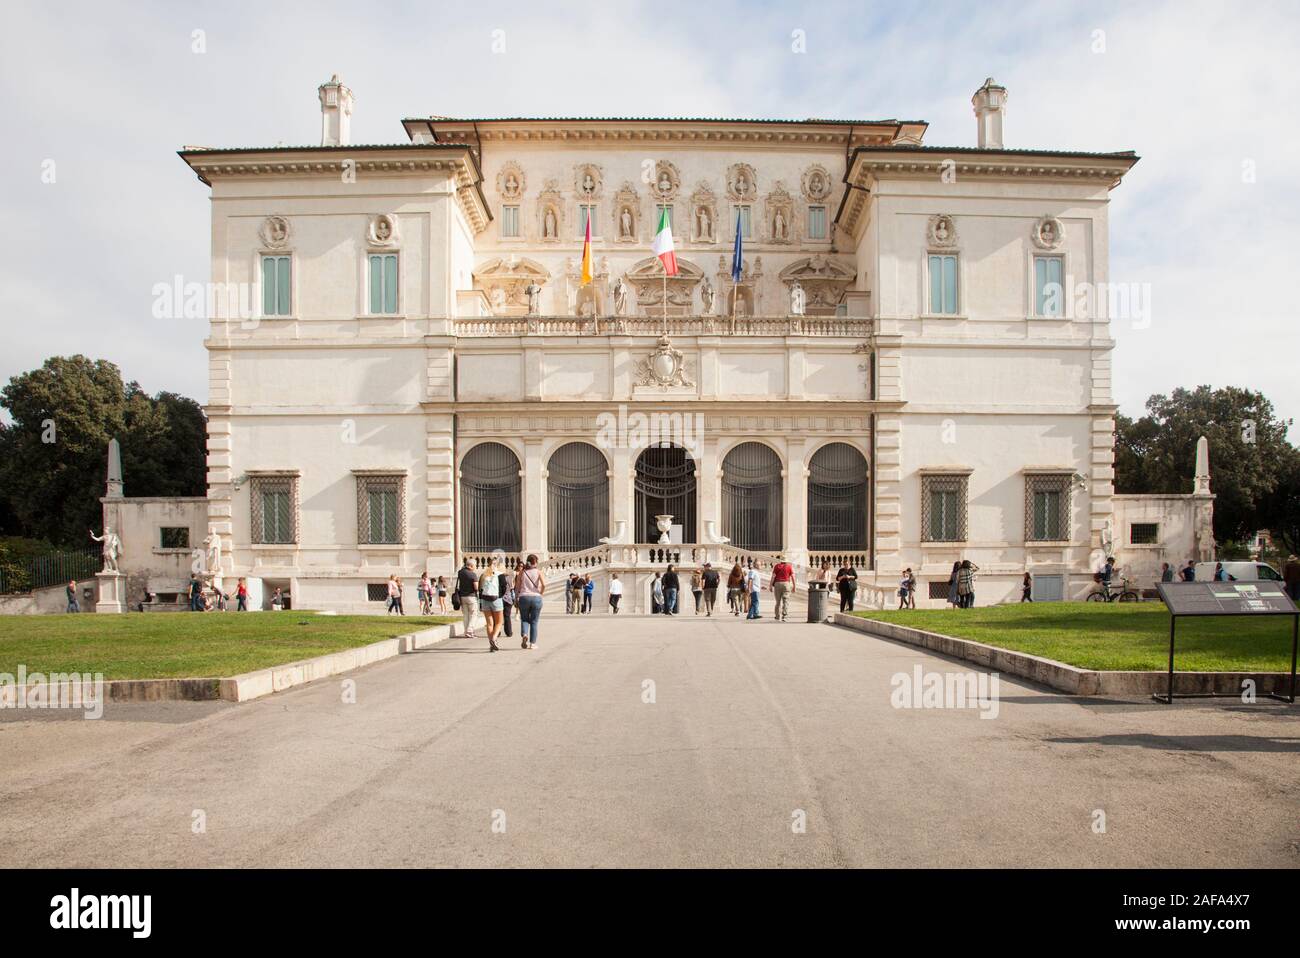 The exterior of the Galleria Borghese (Borghese Gallery), Rome Stock Photo